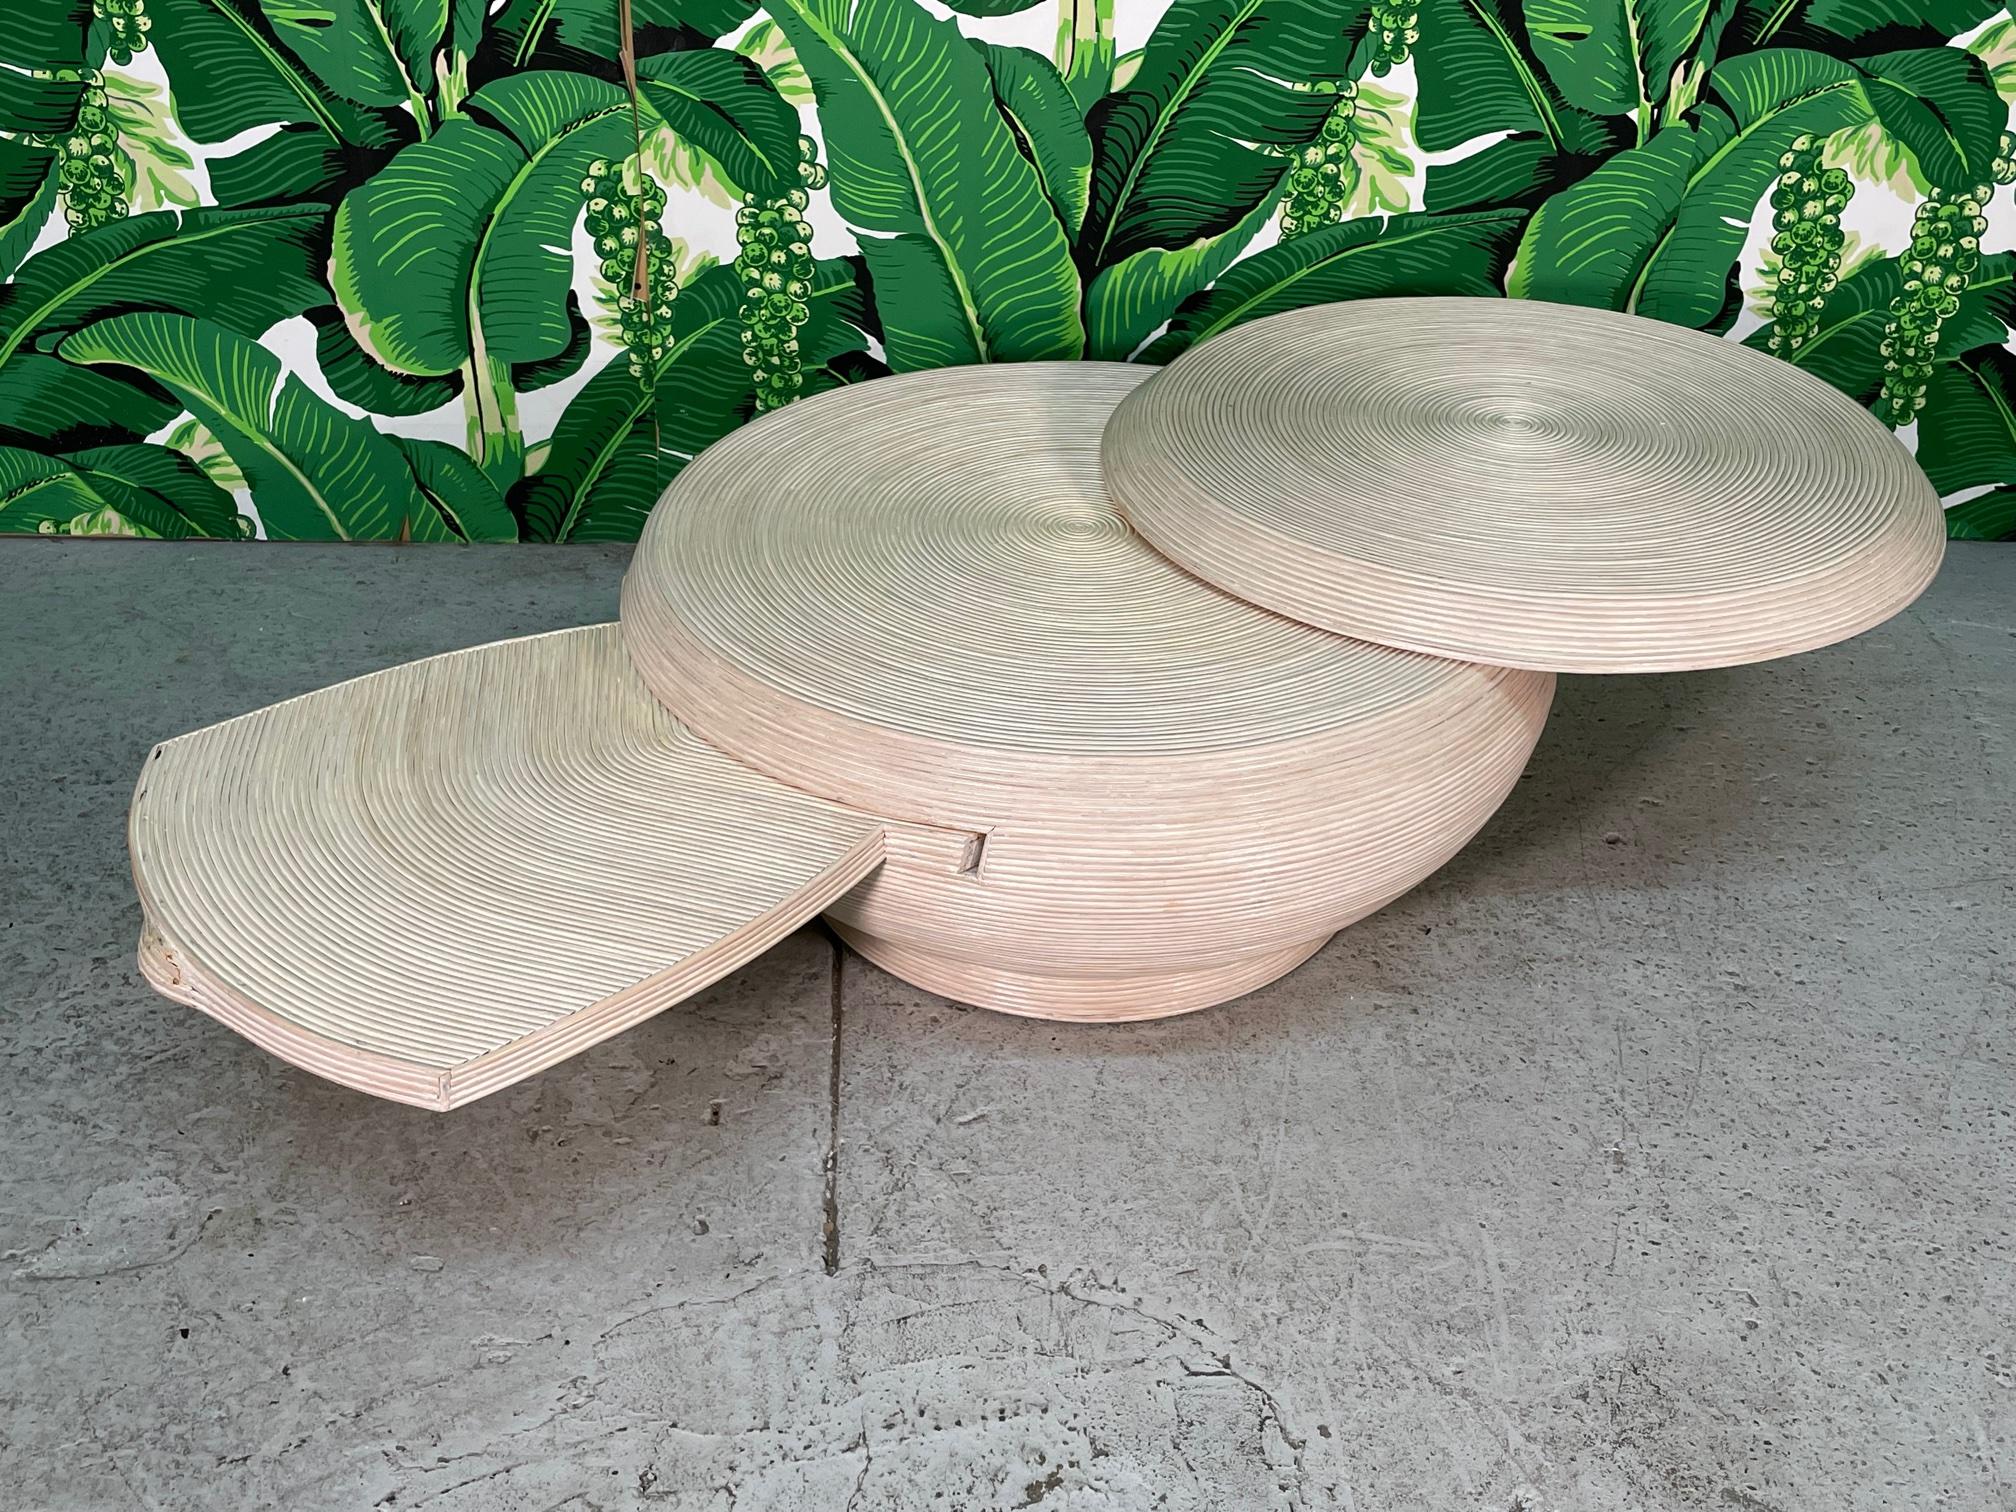 Vintage sculptural coffee table features a unique spherical form and full veneer of pencil reed rattan. Top rotates to expand surface area and hidden shelf pulls out from side. Similar to the split reed veneers of Gabriella Crespi and Betty